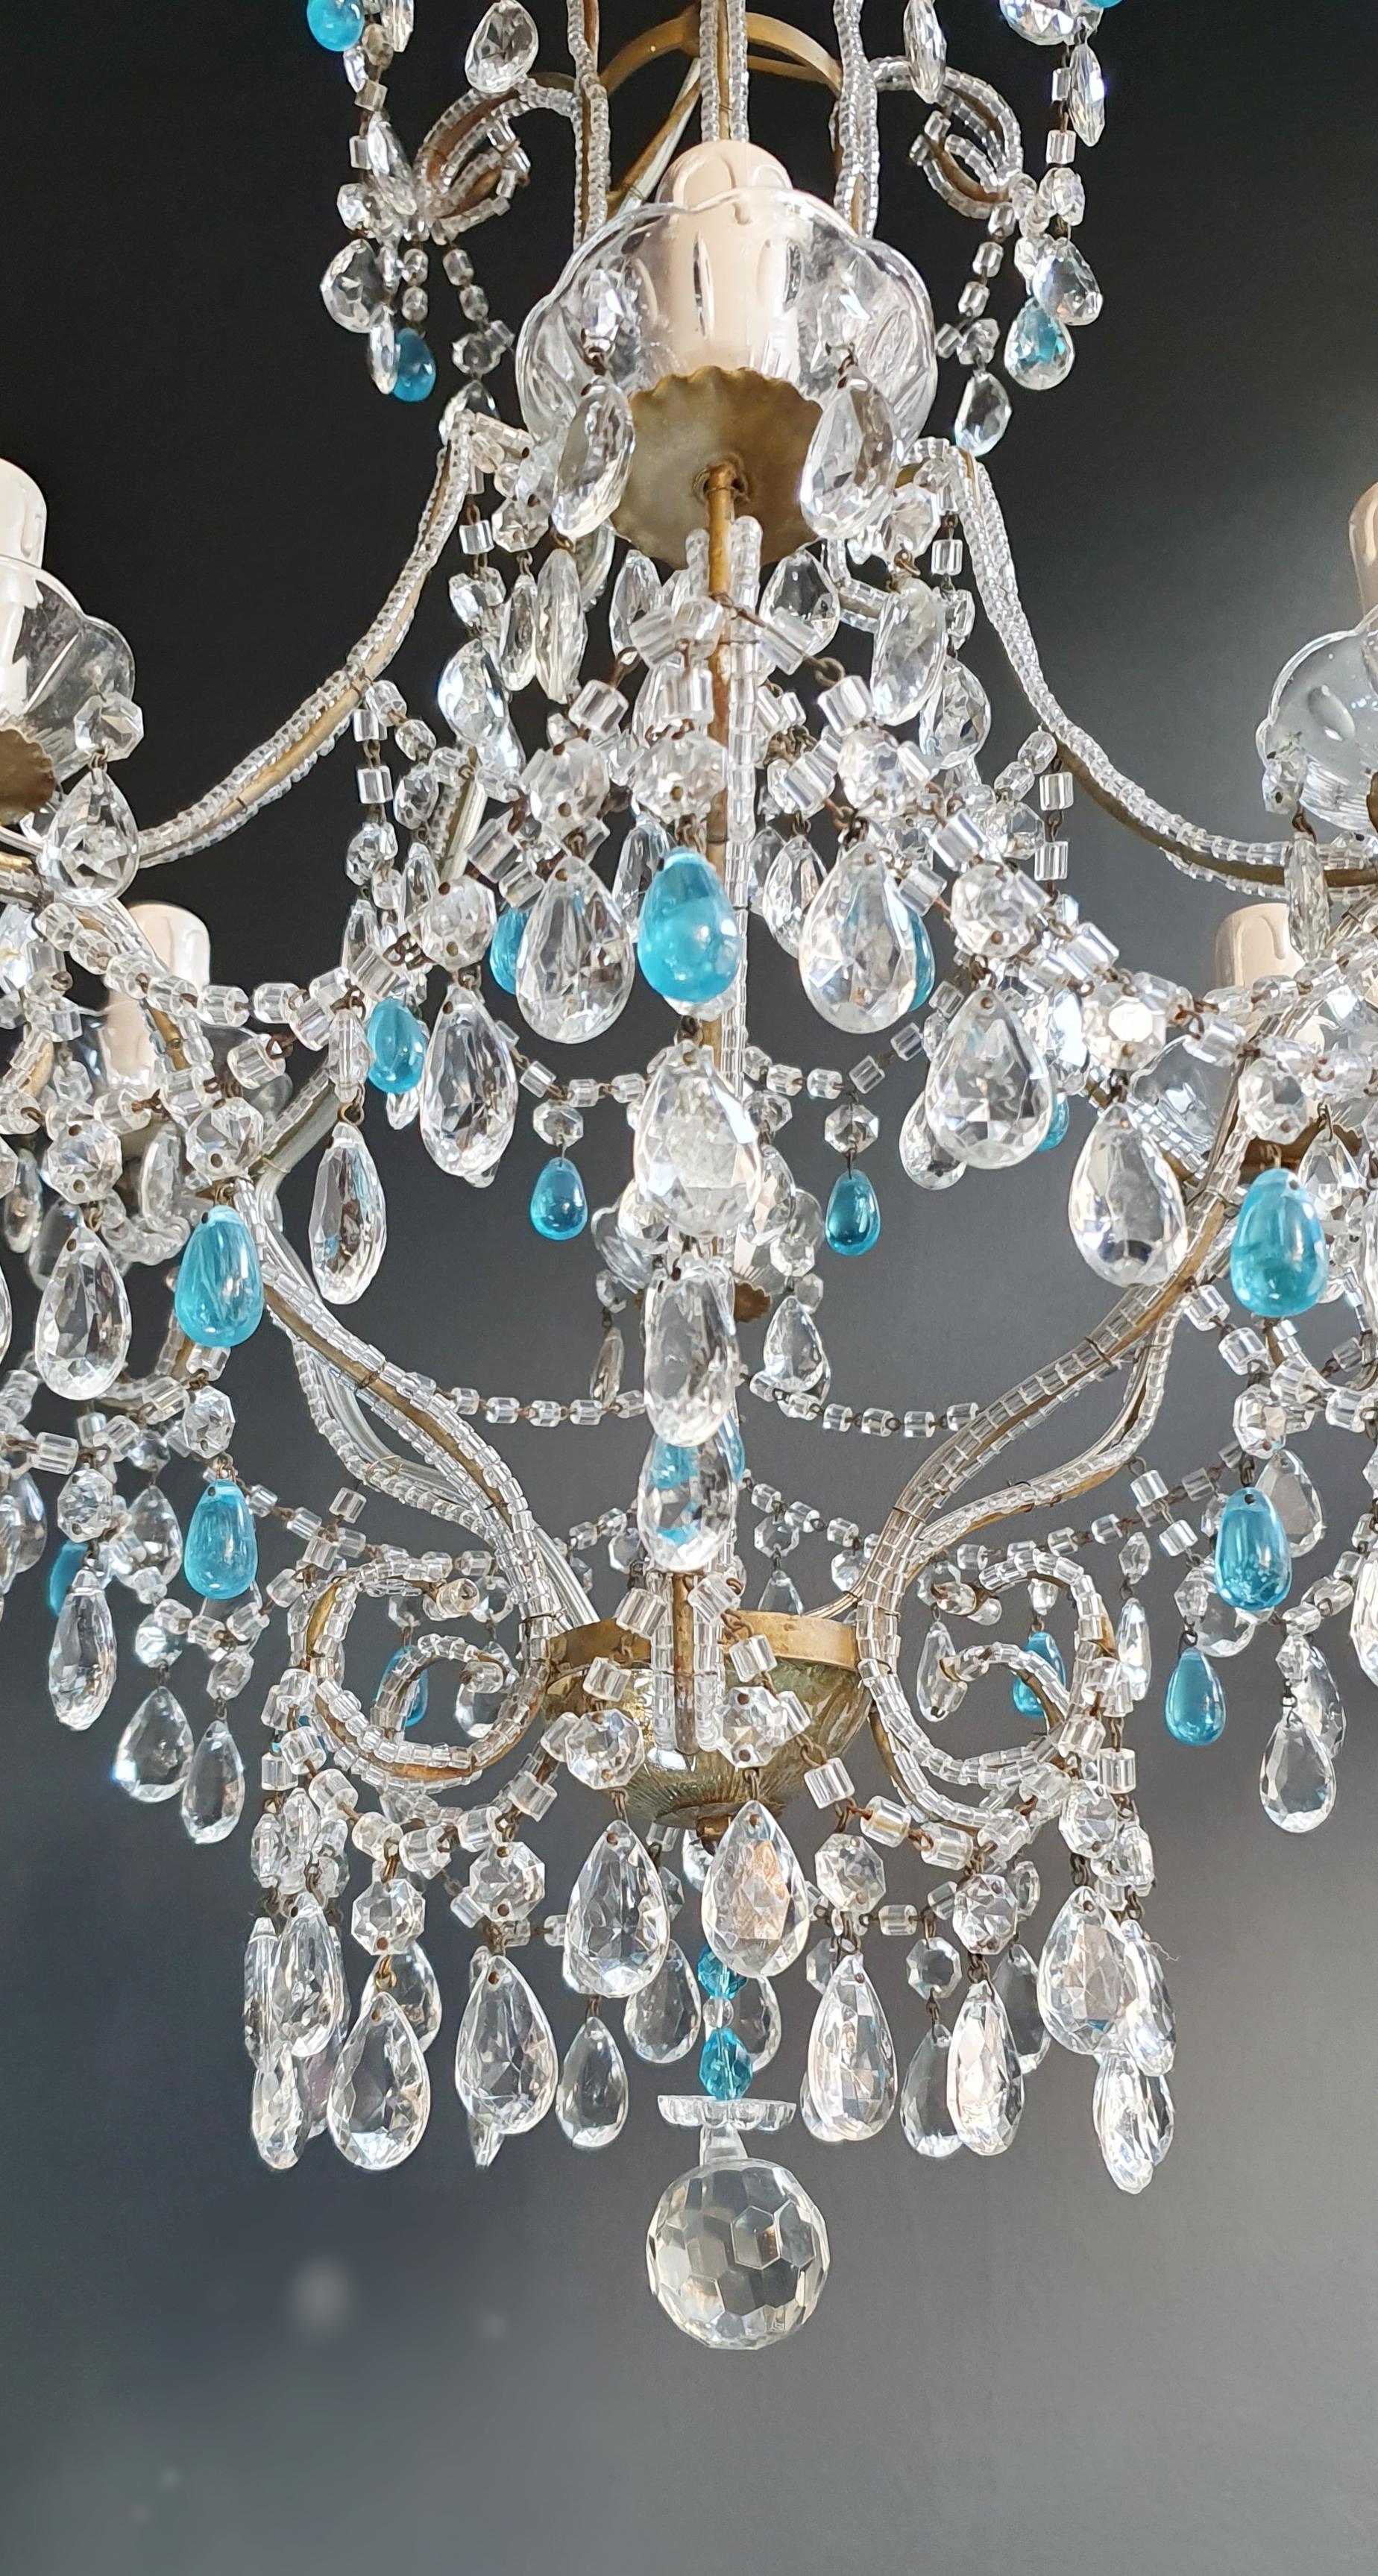 Blue crystal chandelier antique ceiling Murano Florentiner lustre Art Nouveau

Measures: Total height 90 cm, height without chain 70 cm, diameter 44 cm. Weight (approximately) 5 kg.

Number of lights: 6 light bulb sockets: E14 material: Iron,